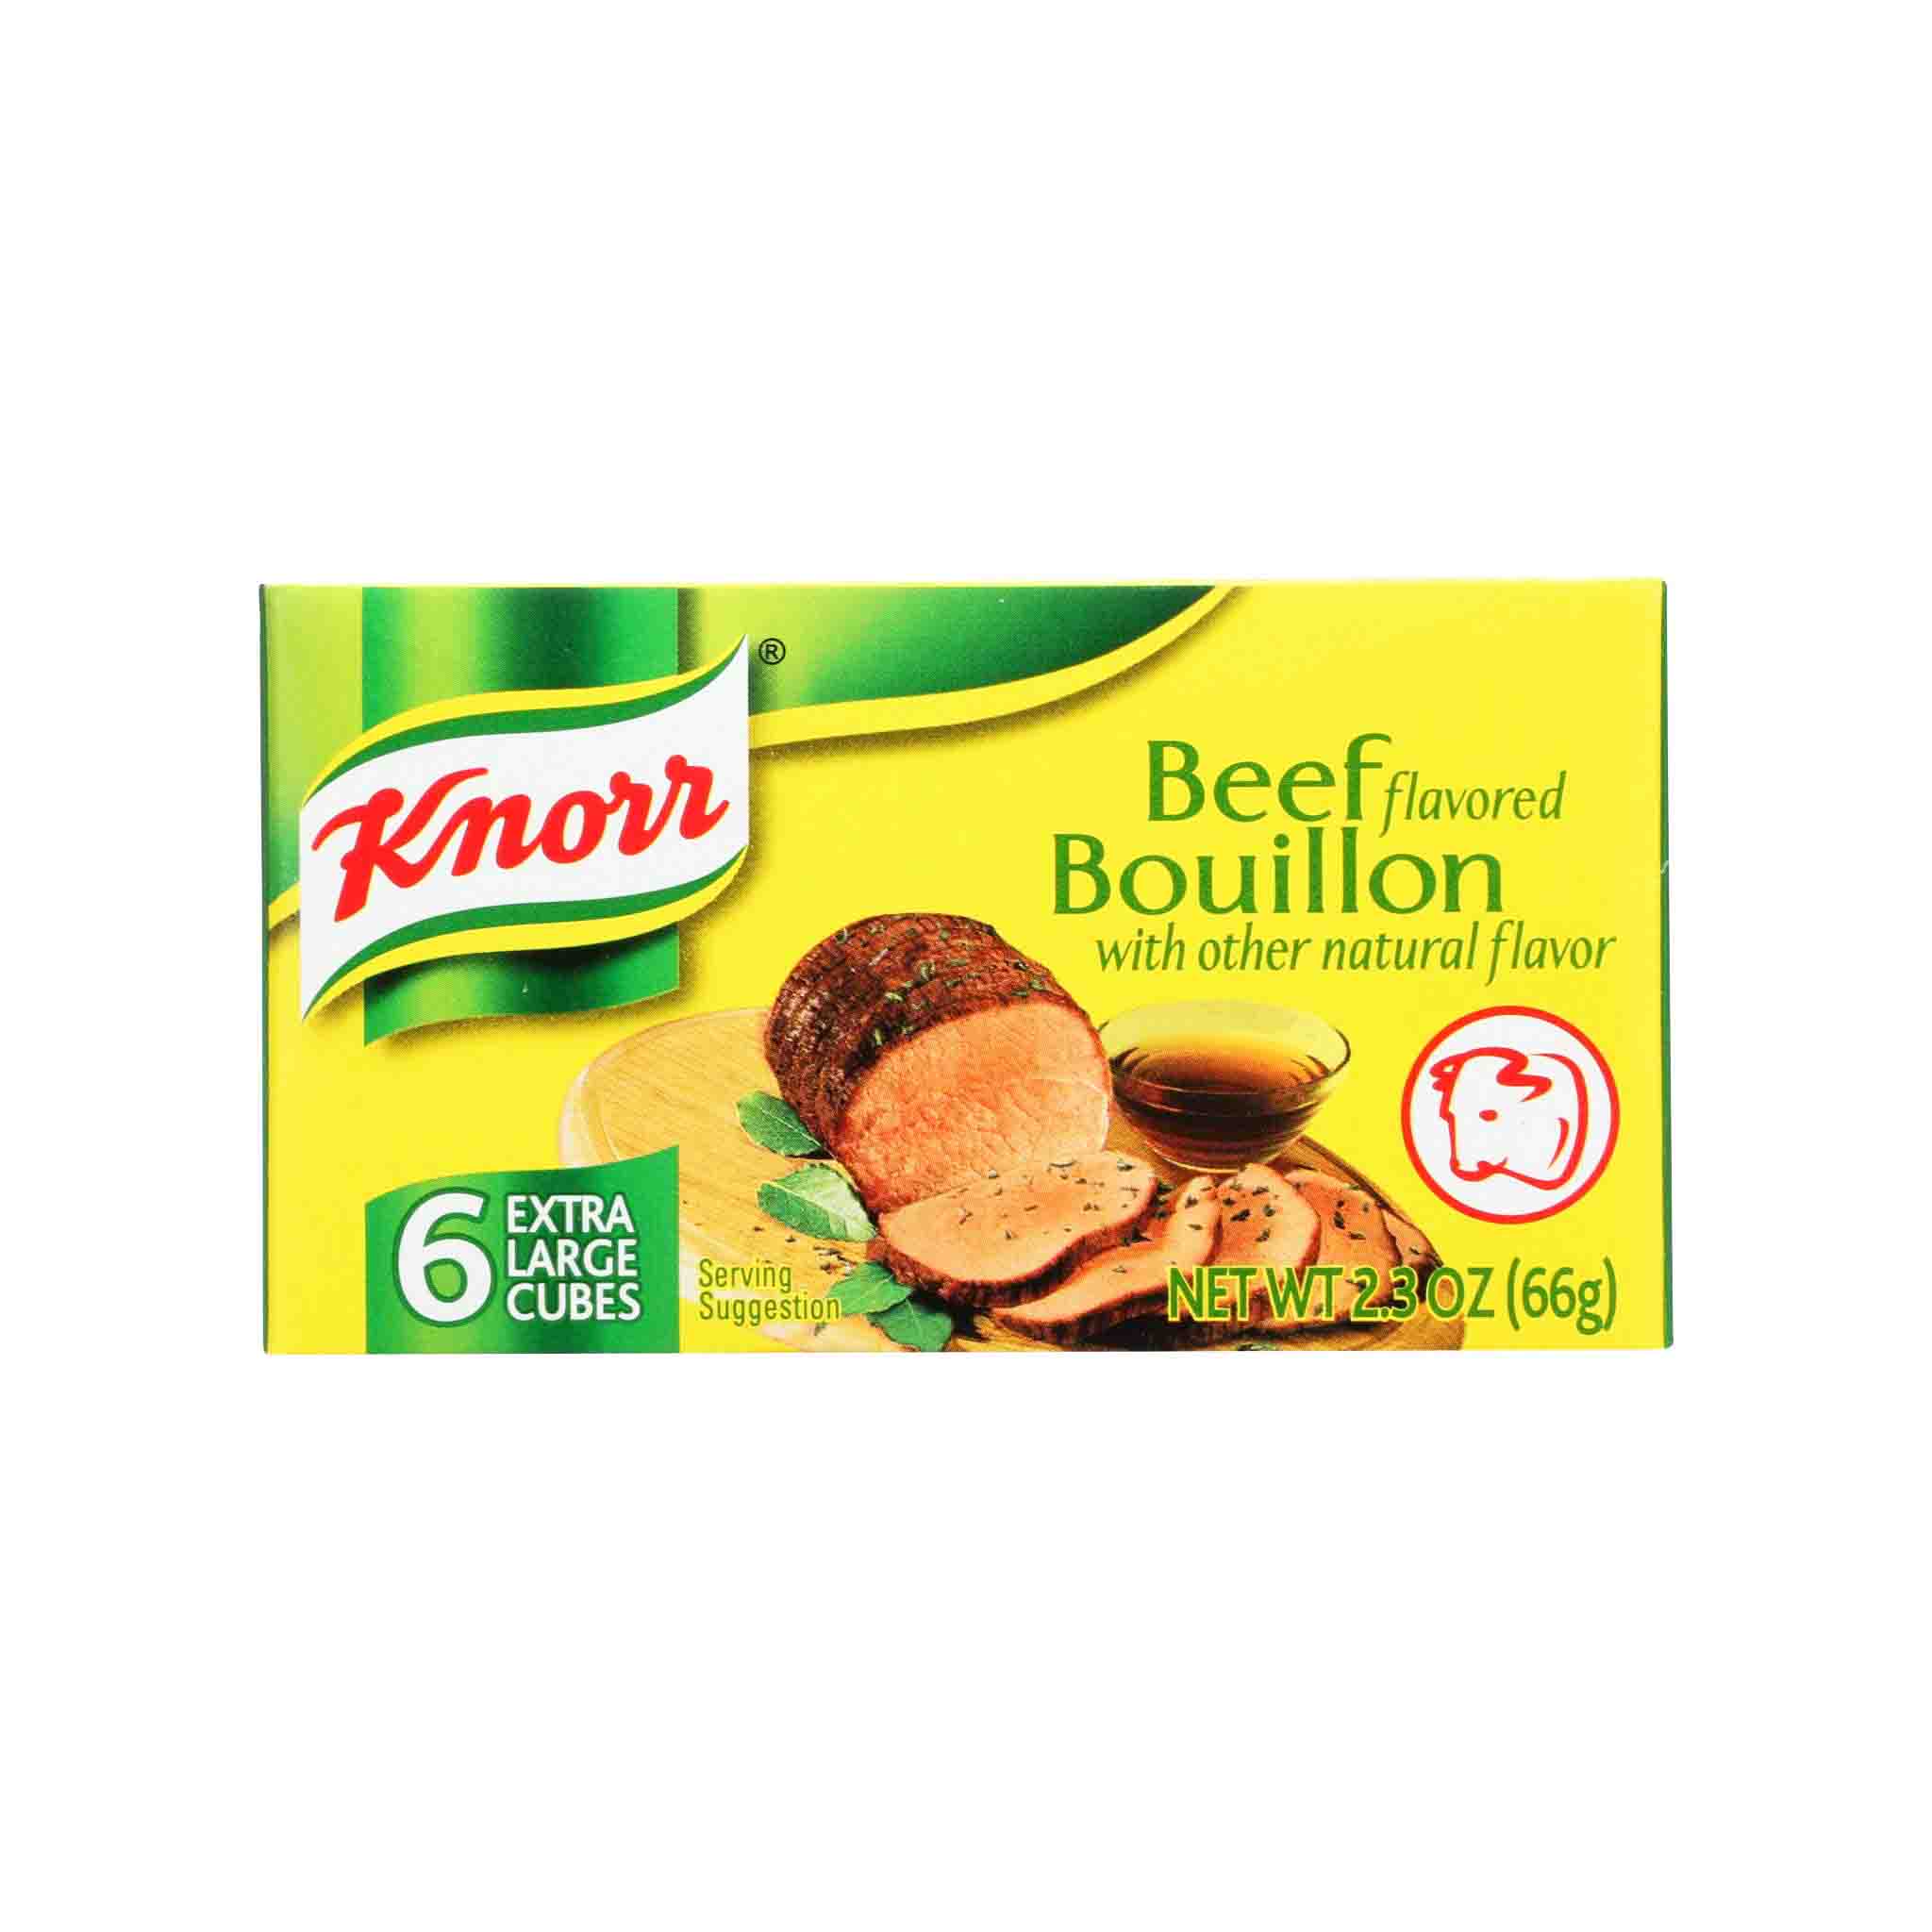 KNORR BEEF FLAVORED BOUILLON 2.3oz